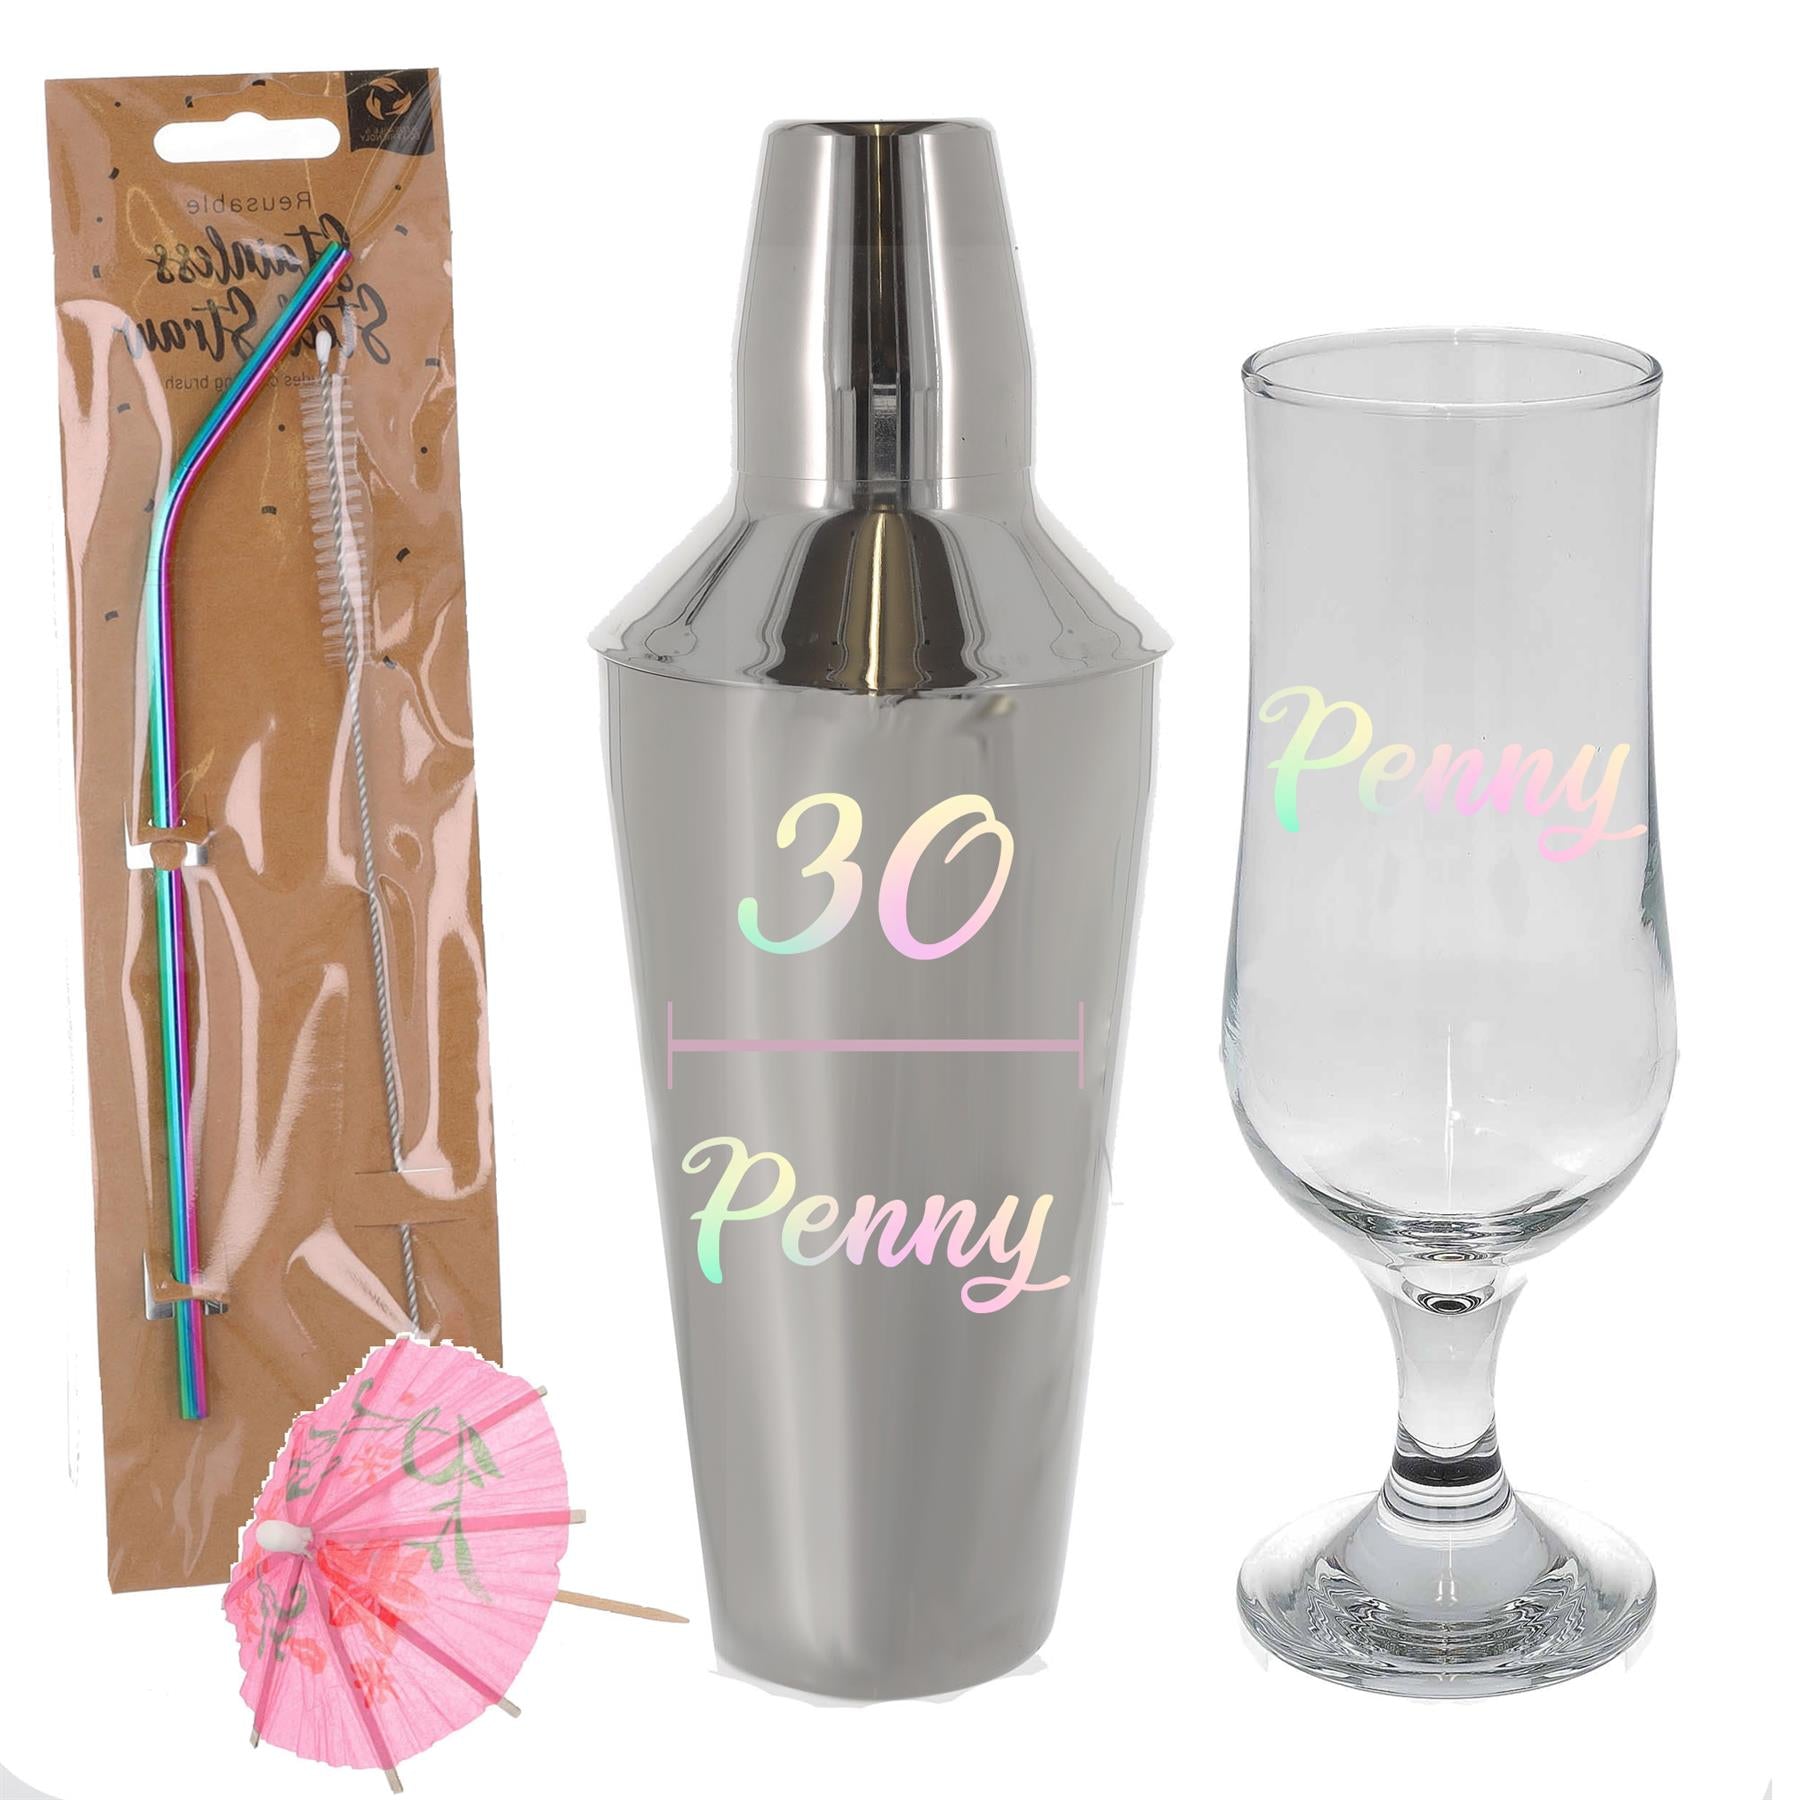 Personalised 30th Birthday Cocktail Shaker & Pina Colada Glass Gift Set  - Always Looking Good - Full Set  